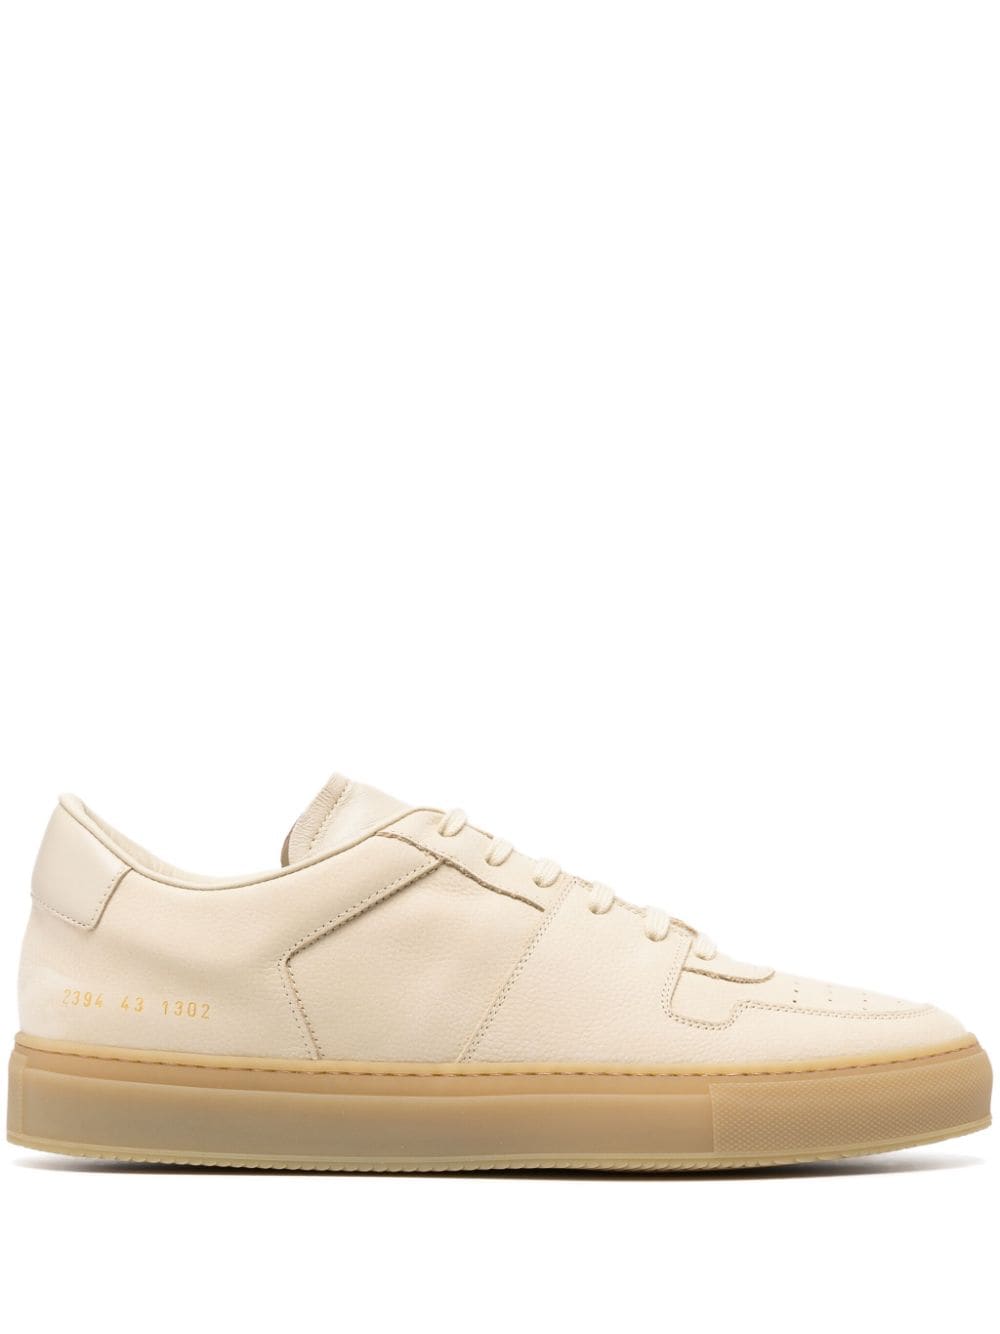 Common Projects Decades leather sneakers - Neutrals von Common Projects